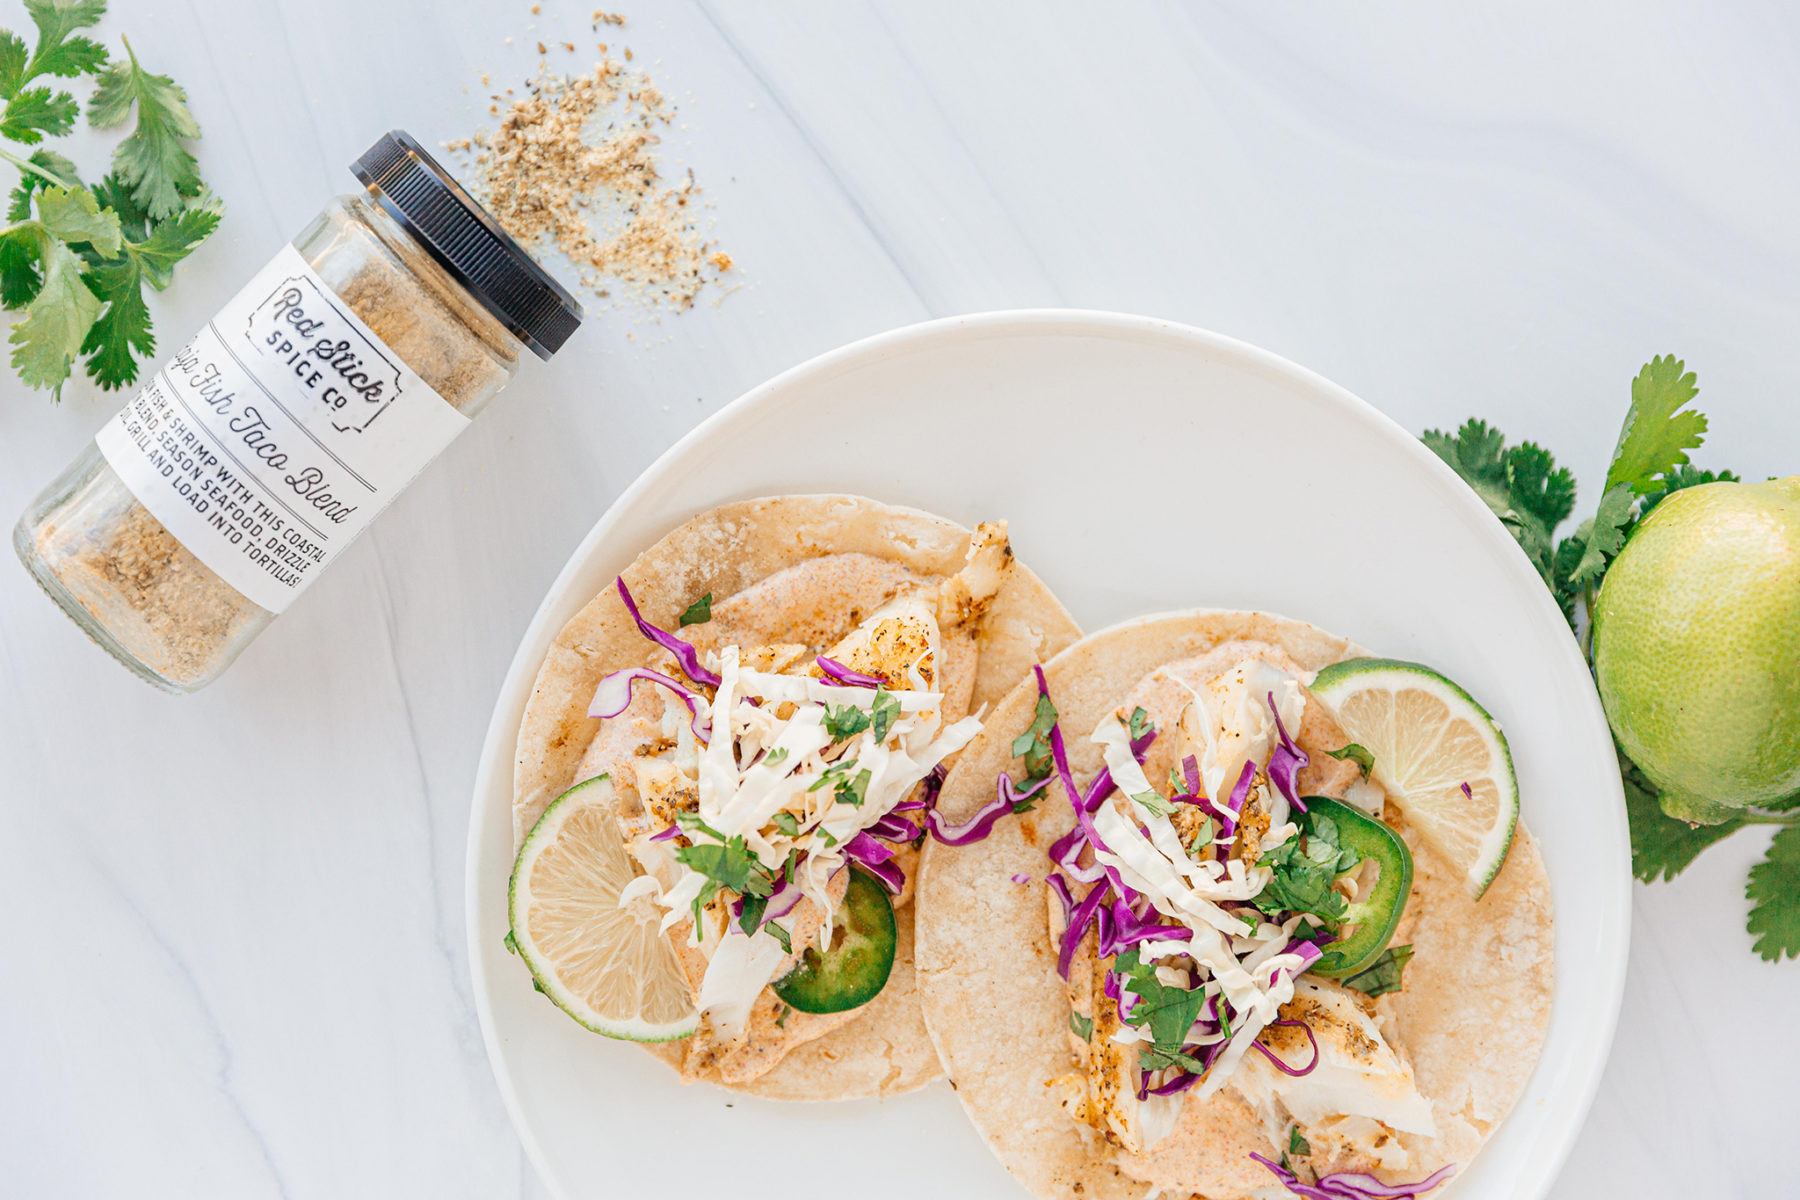 Baja Fish Tacos with lime